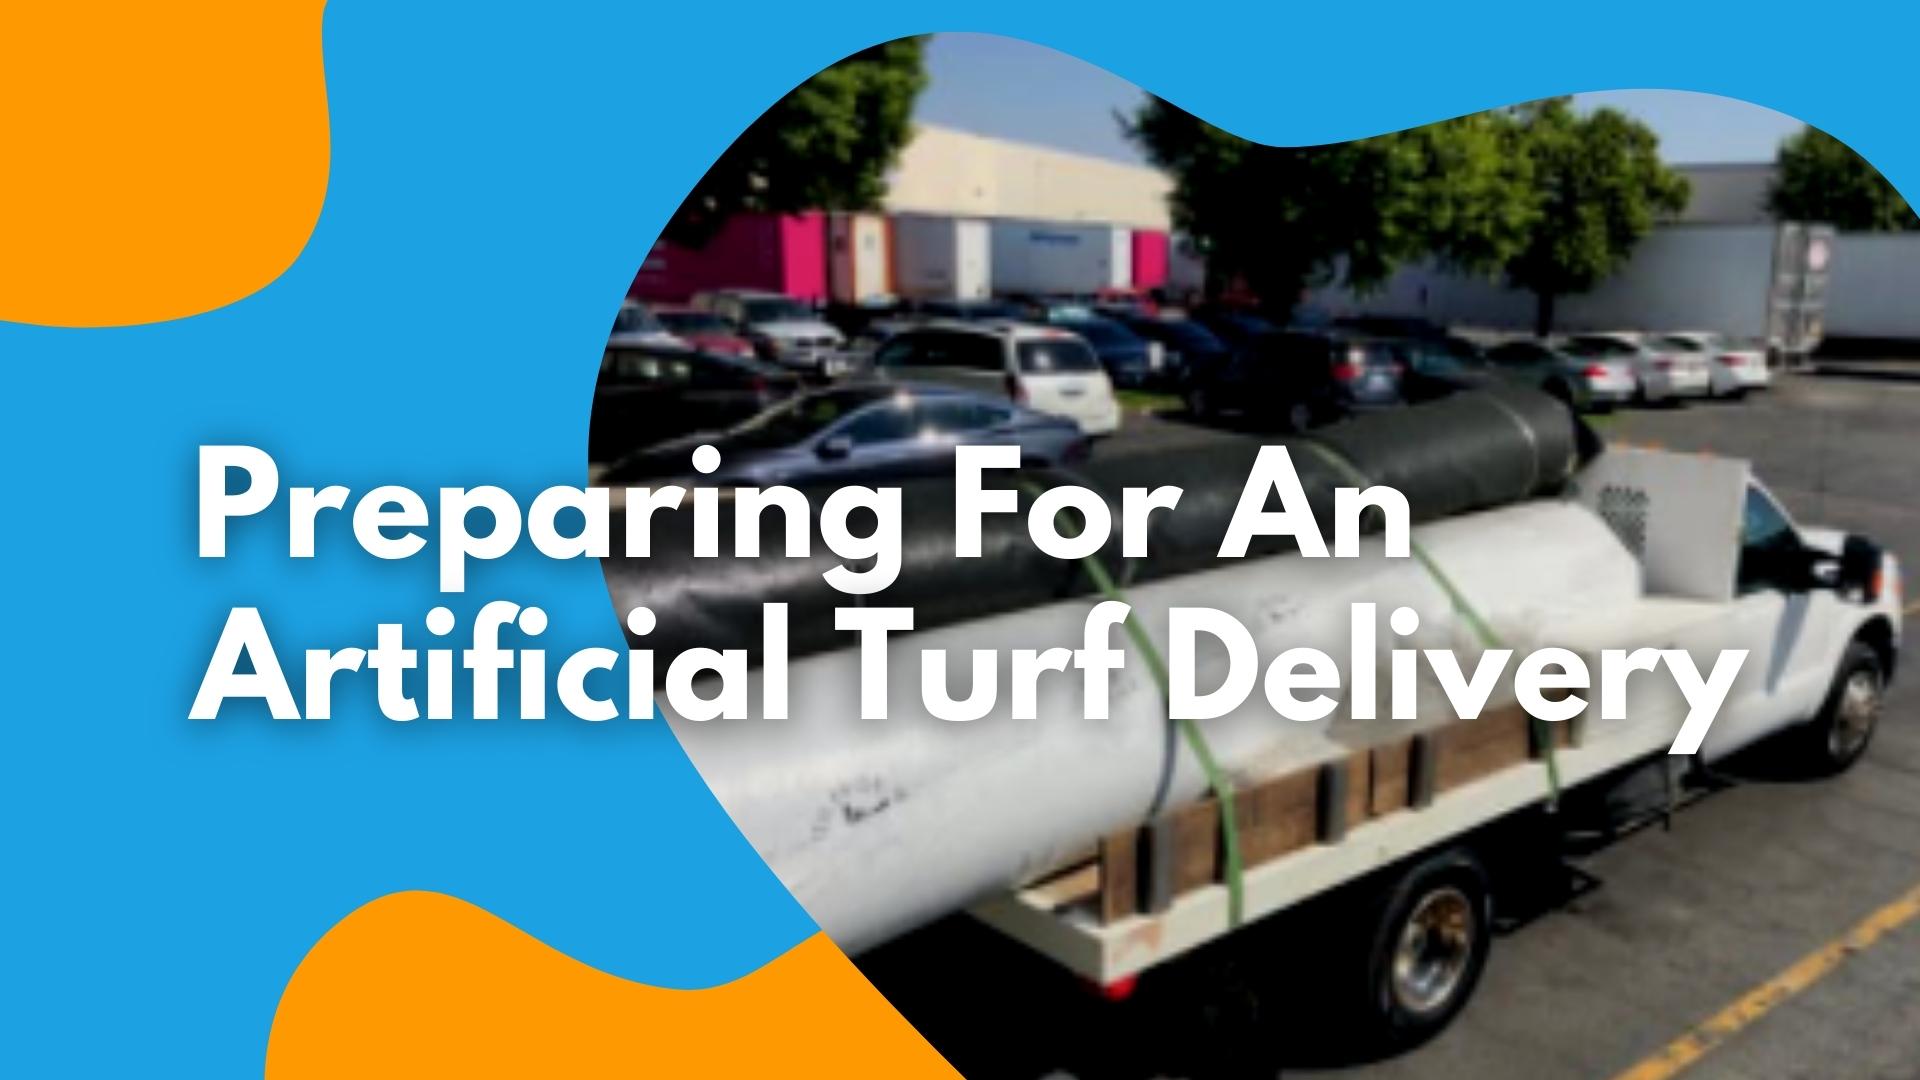 Preparing for an Artificial Turf Delivery